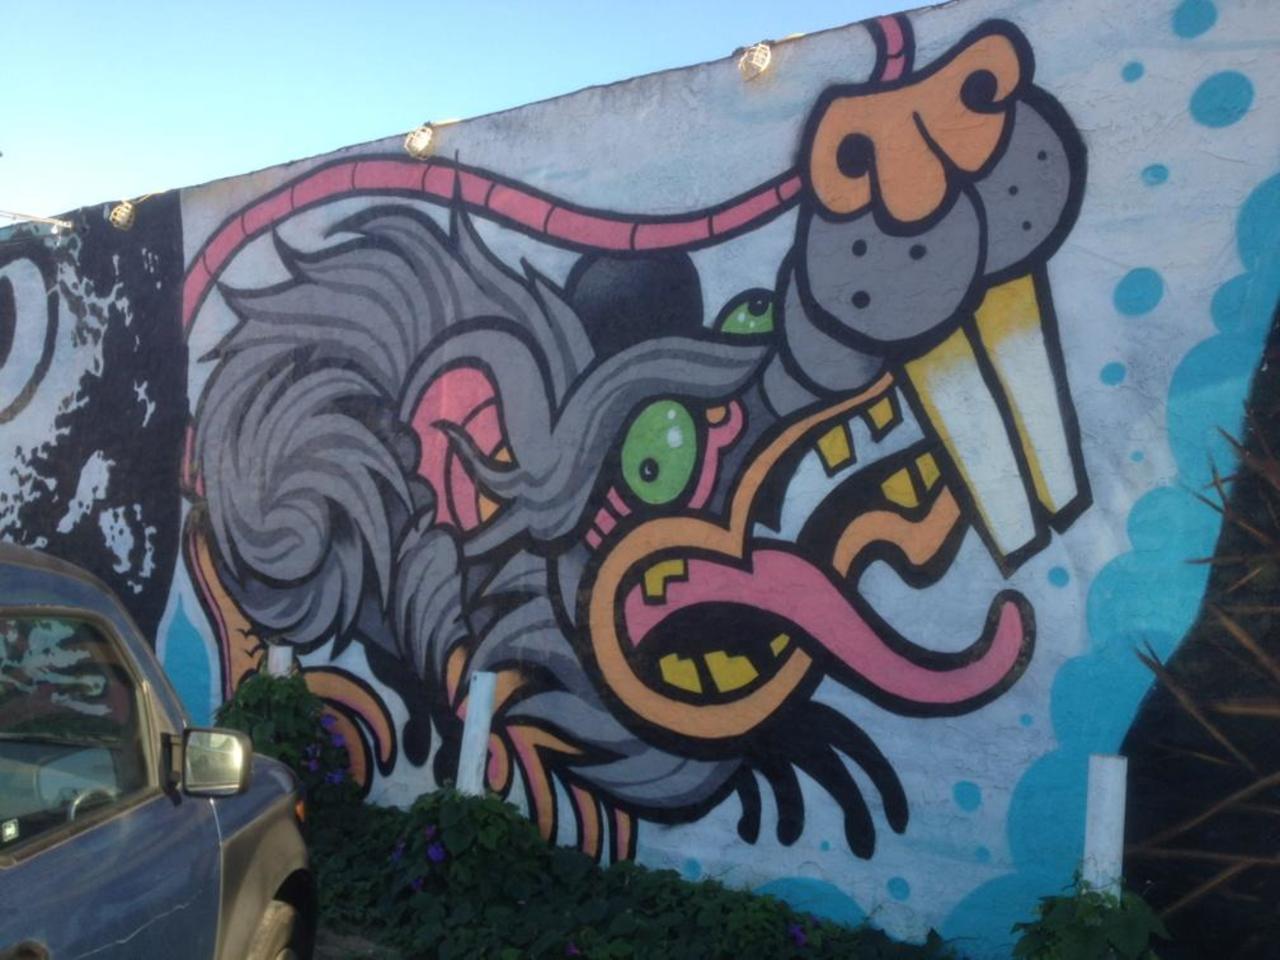 This rat is so ugly but so cool at the same time! #Streetart in downtown #SanDiego. #Graffiti photo by me! http://t.co/hBNmY5vj0N